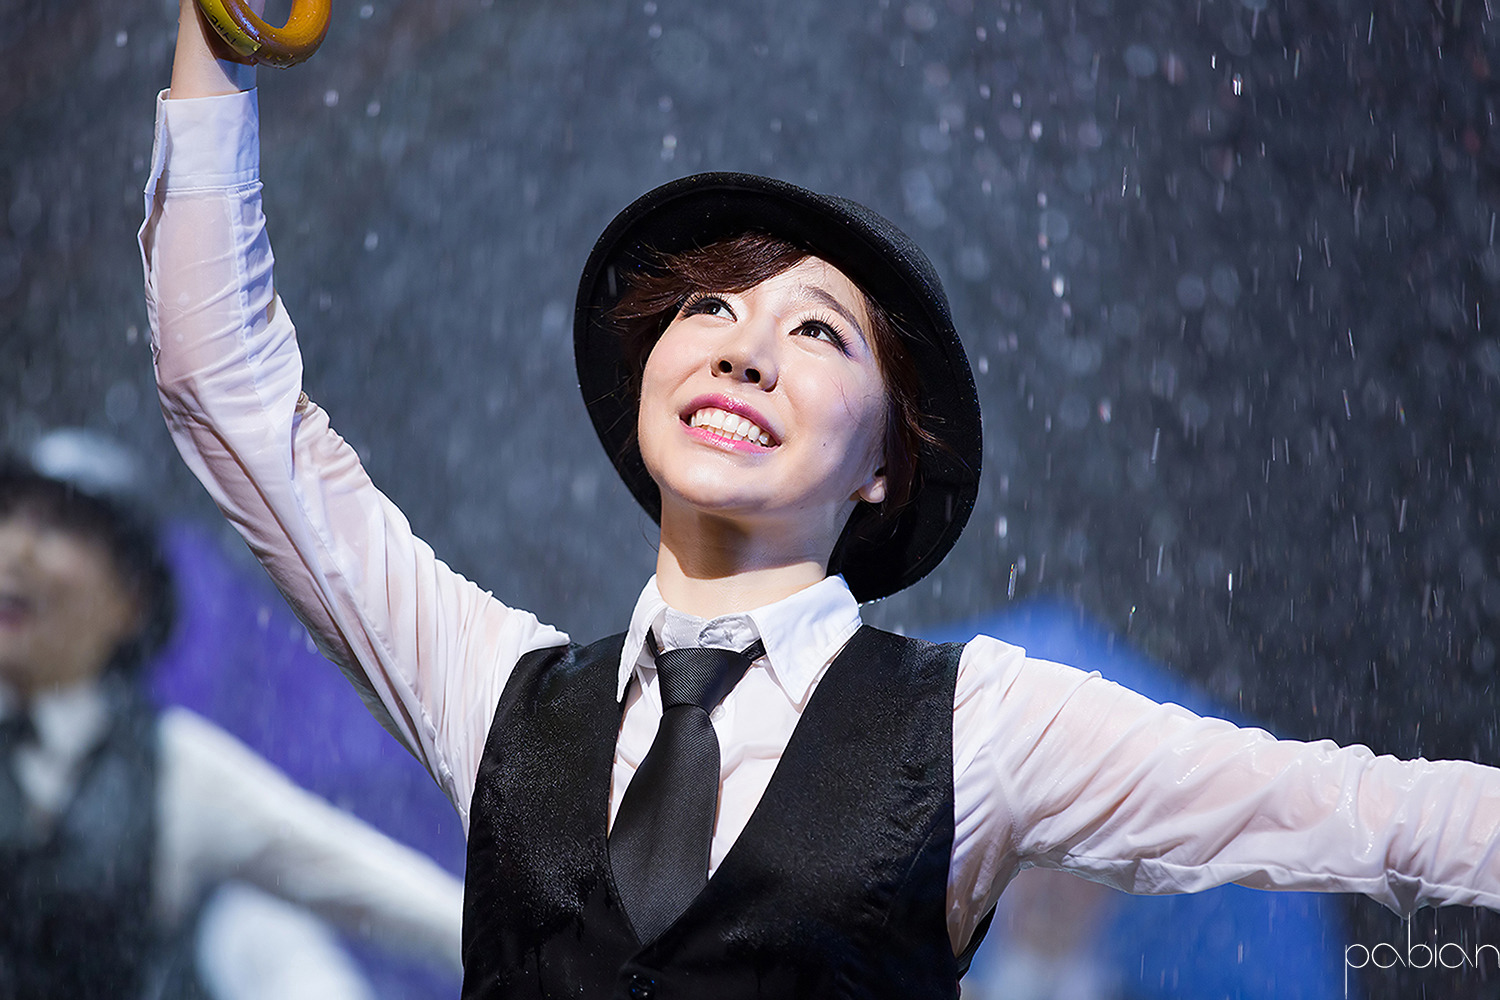 [OTHER][29-04-2014]Sunny sẽ tham gia vở nhạc kịch "SINGIN' IN THE RAIN" - Page 2 2350AF47539E715631ABDB